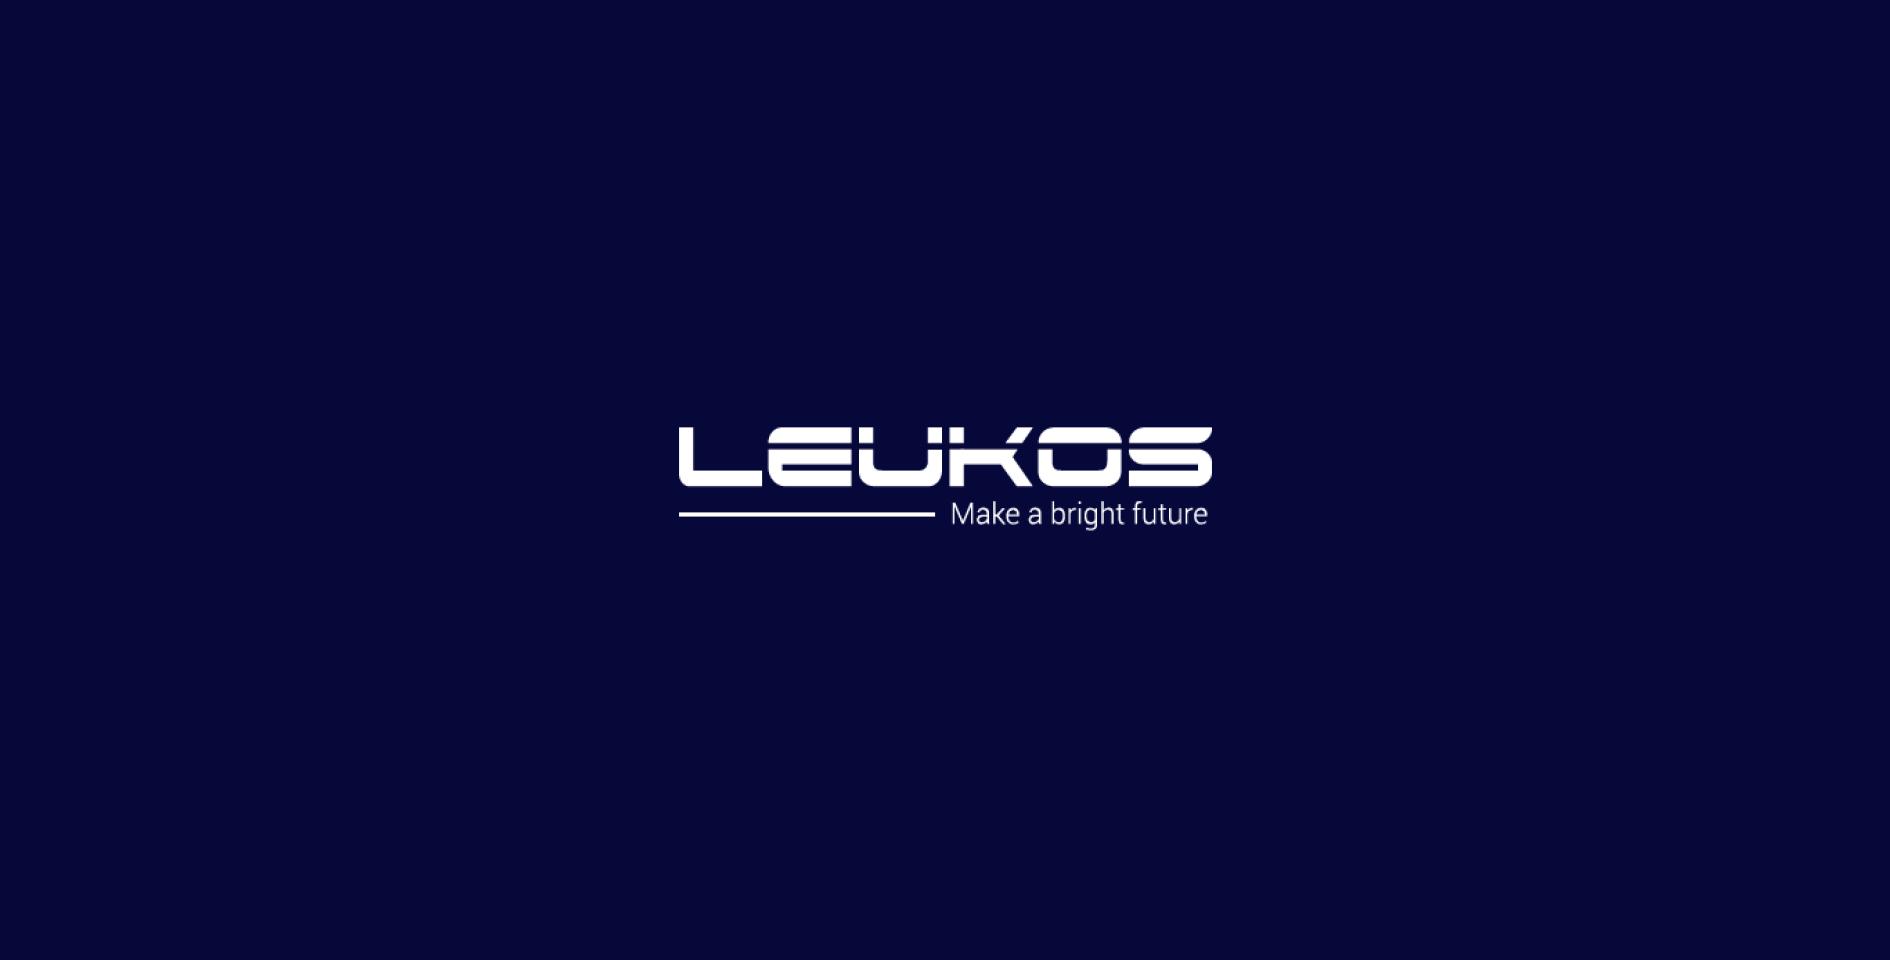 Product Our products - Leukos laser image